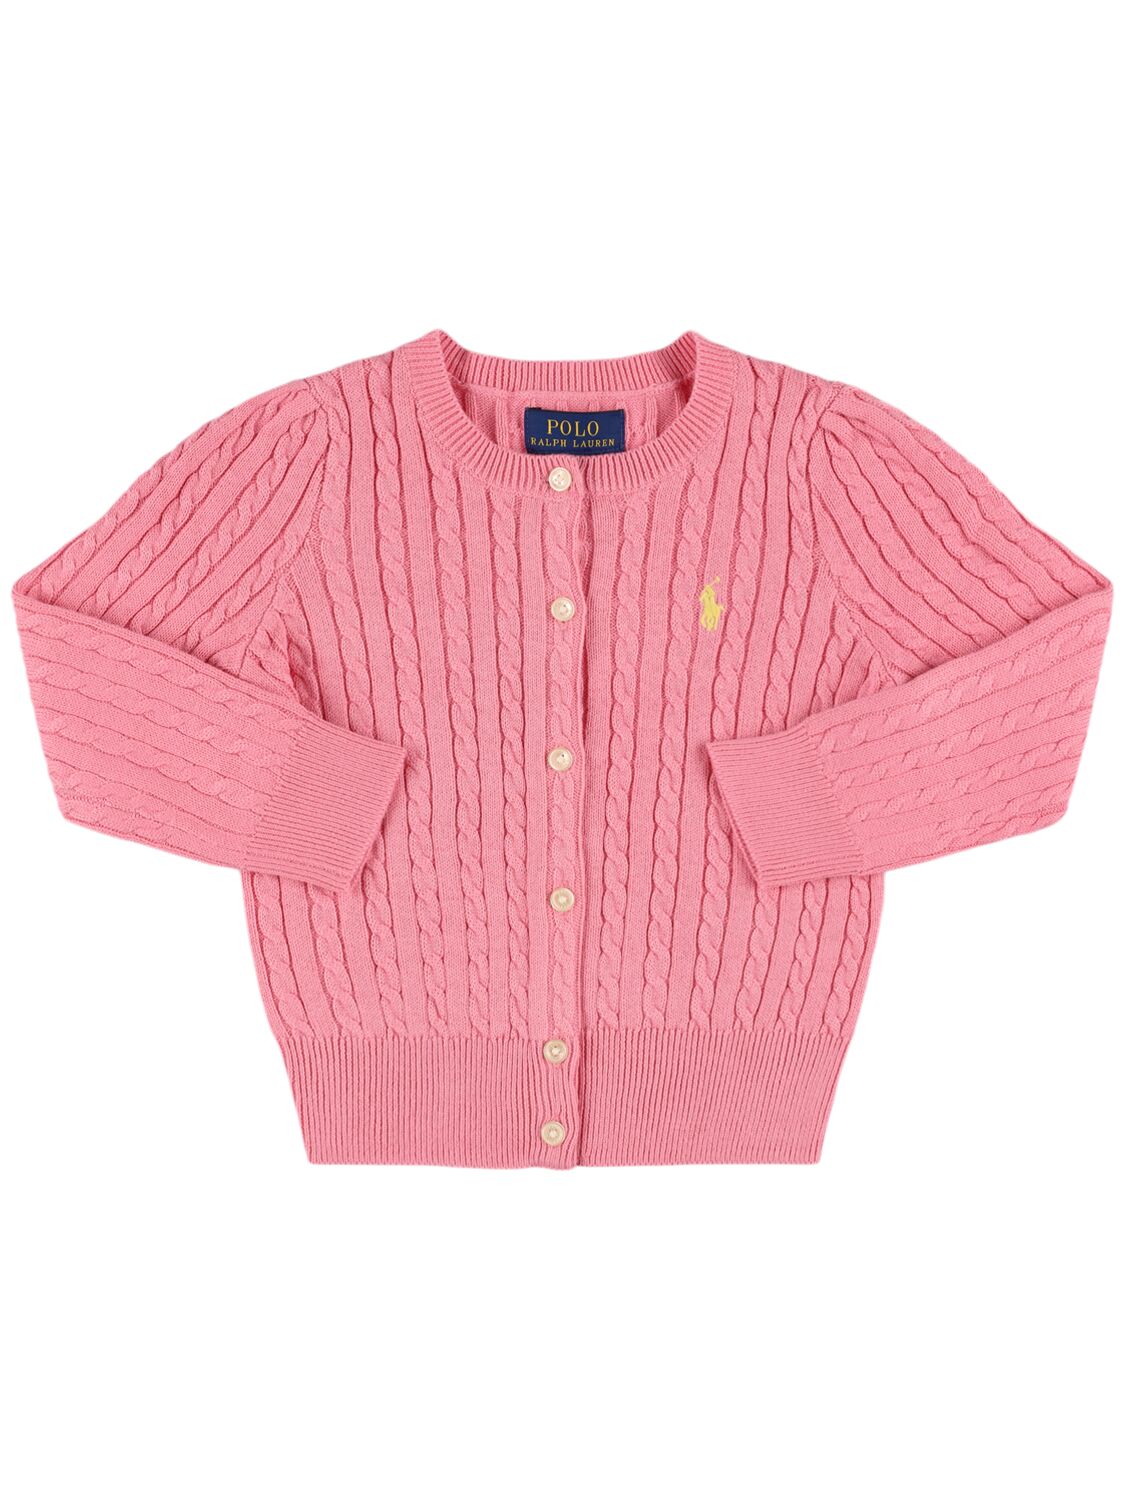 Ralph Lauren Kids' Cotton Cable Knit Cardigan W/logo In Pink